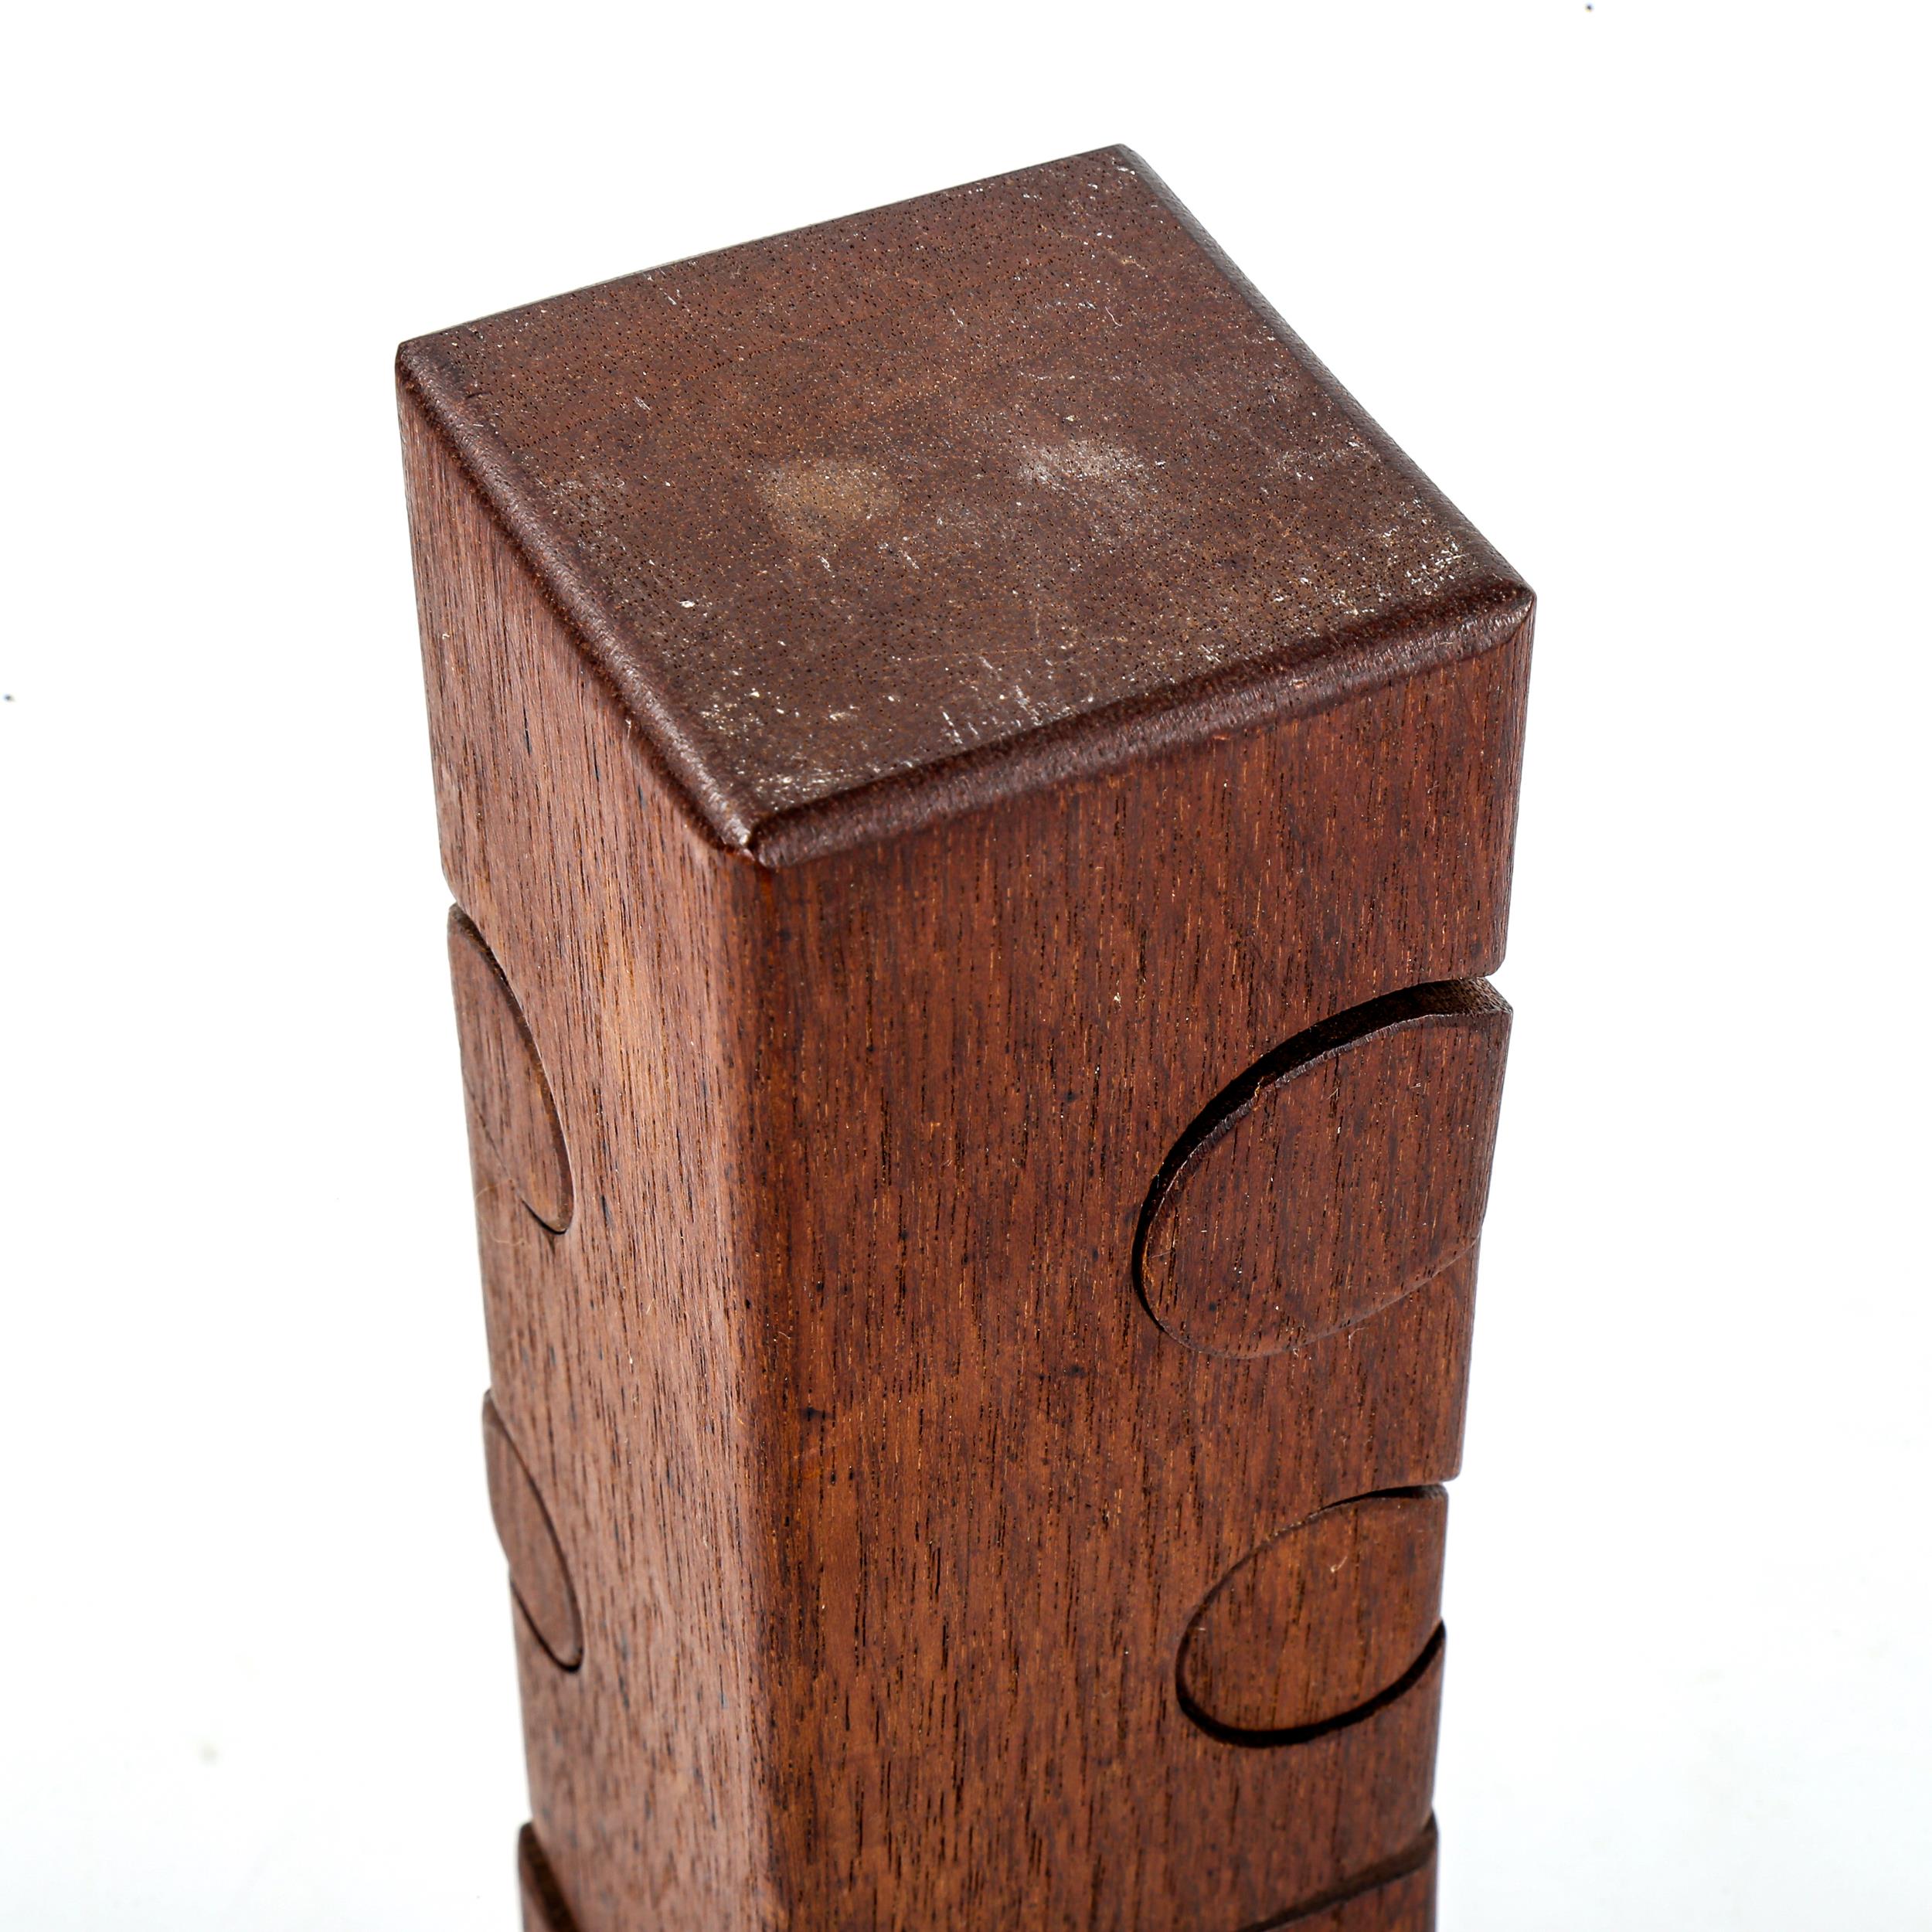 BRIAN WILLSHER, wood peg puzzle sculpture, height 33CM Good condition, pegs are loose in sculpture. - Image 4 of 4